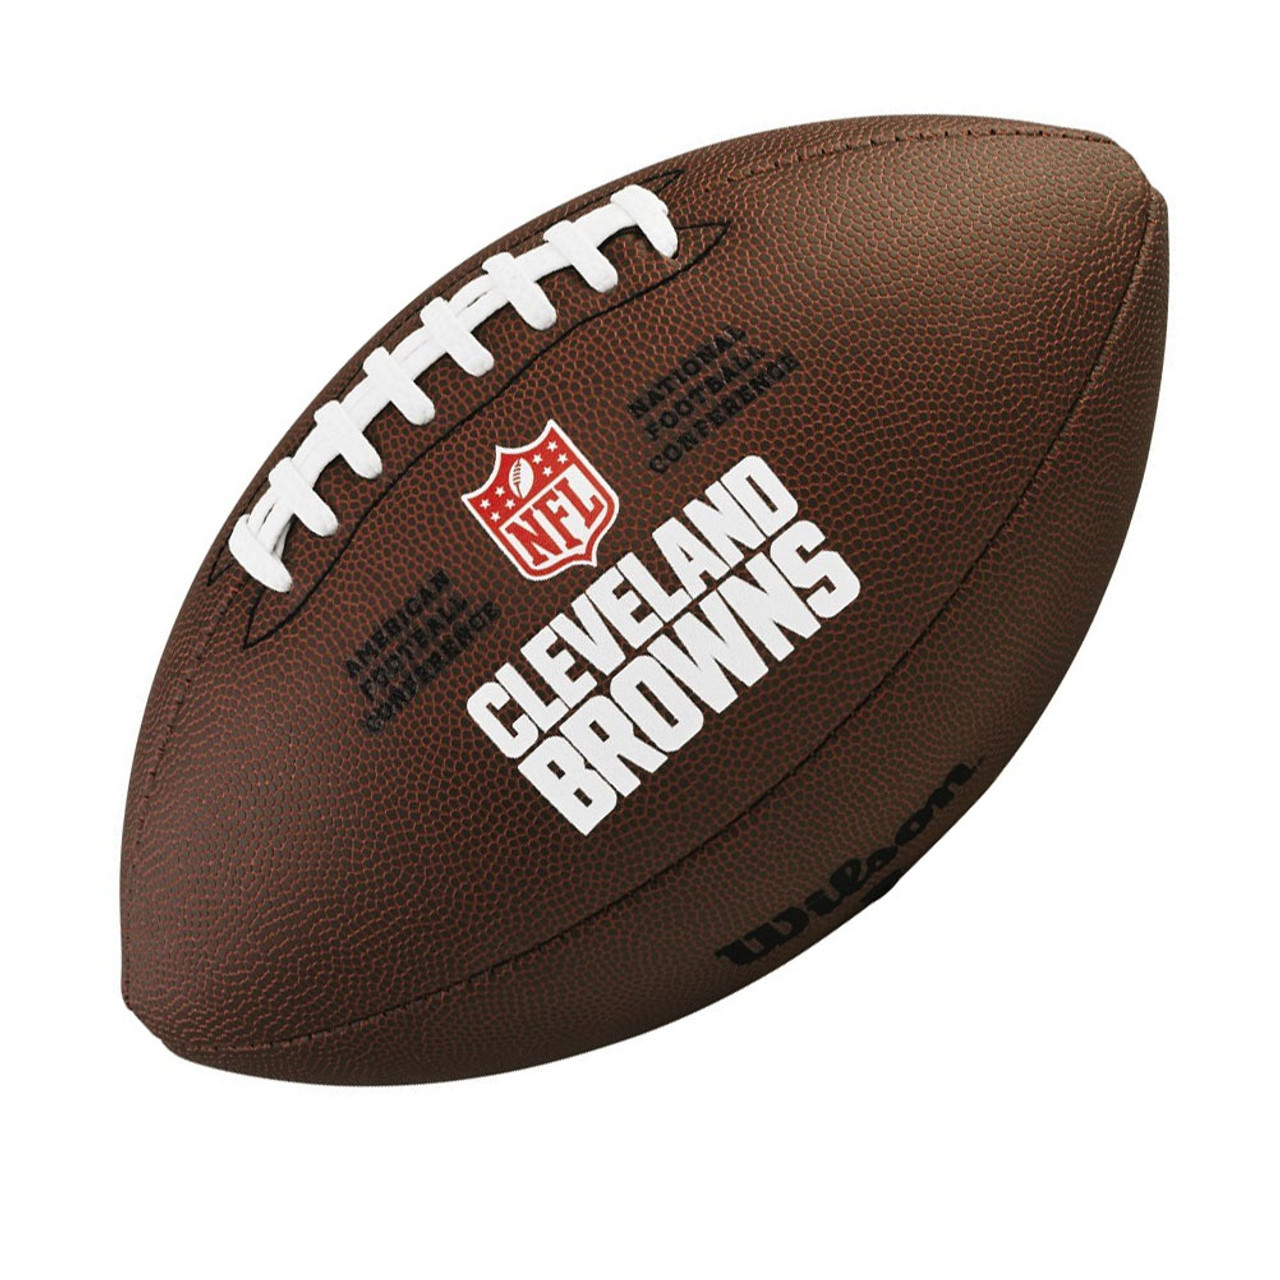 WILSON Cleveland Browns official NFL american football